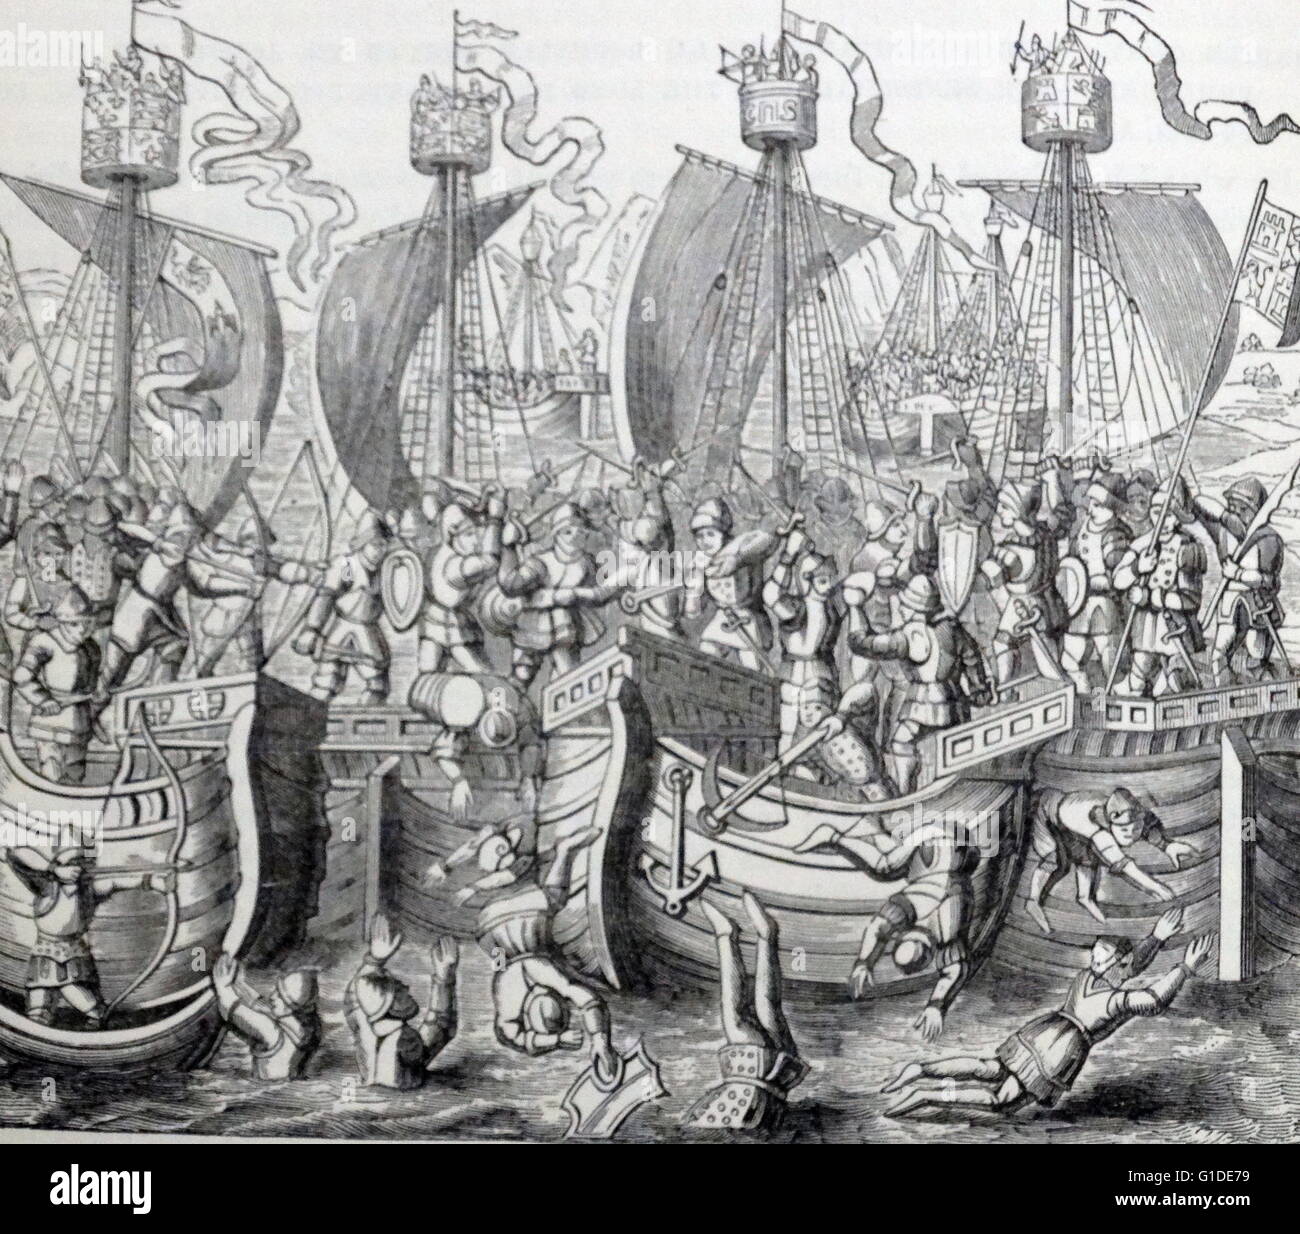 Engraving depicting the Battle of La Rochelle, a naval battle between a Castilian fleet commanded by the Castilian Almirant Ambrosio Boccanegra and an English convoy commanded by John Hastings, 2nd Earl of Pembroke. Dated 14th Century Stock Photo